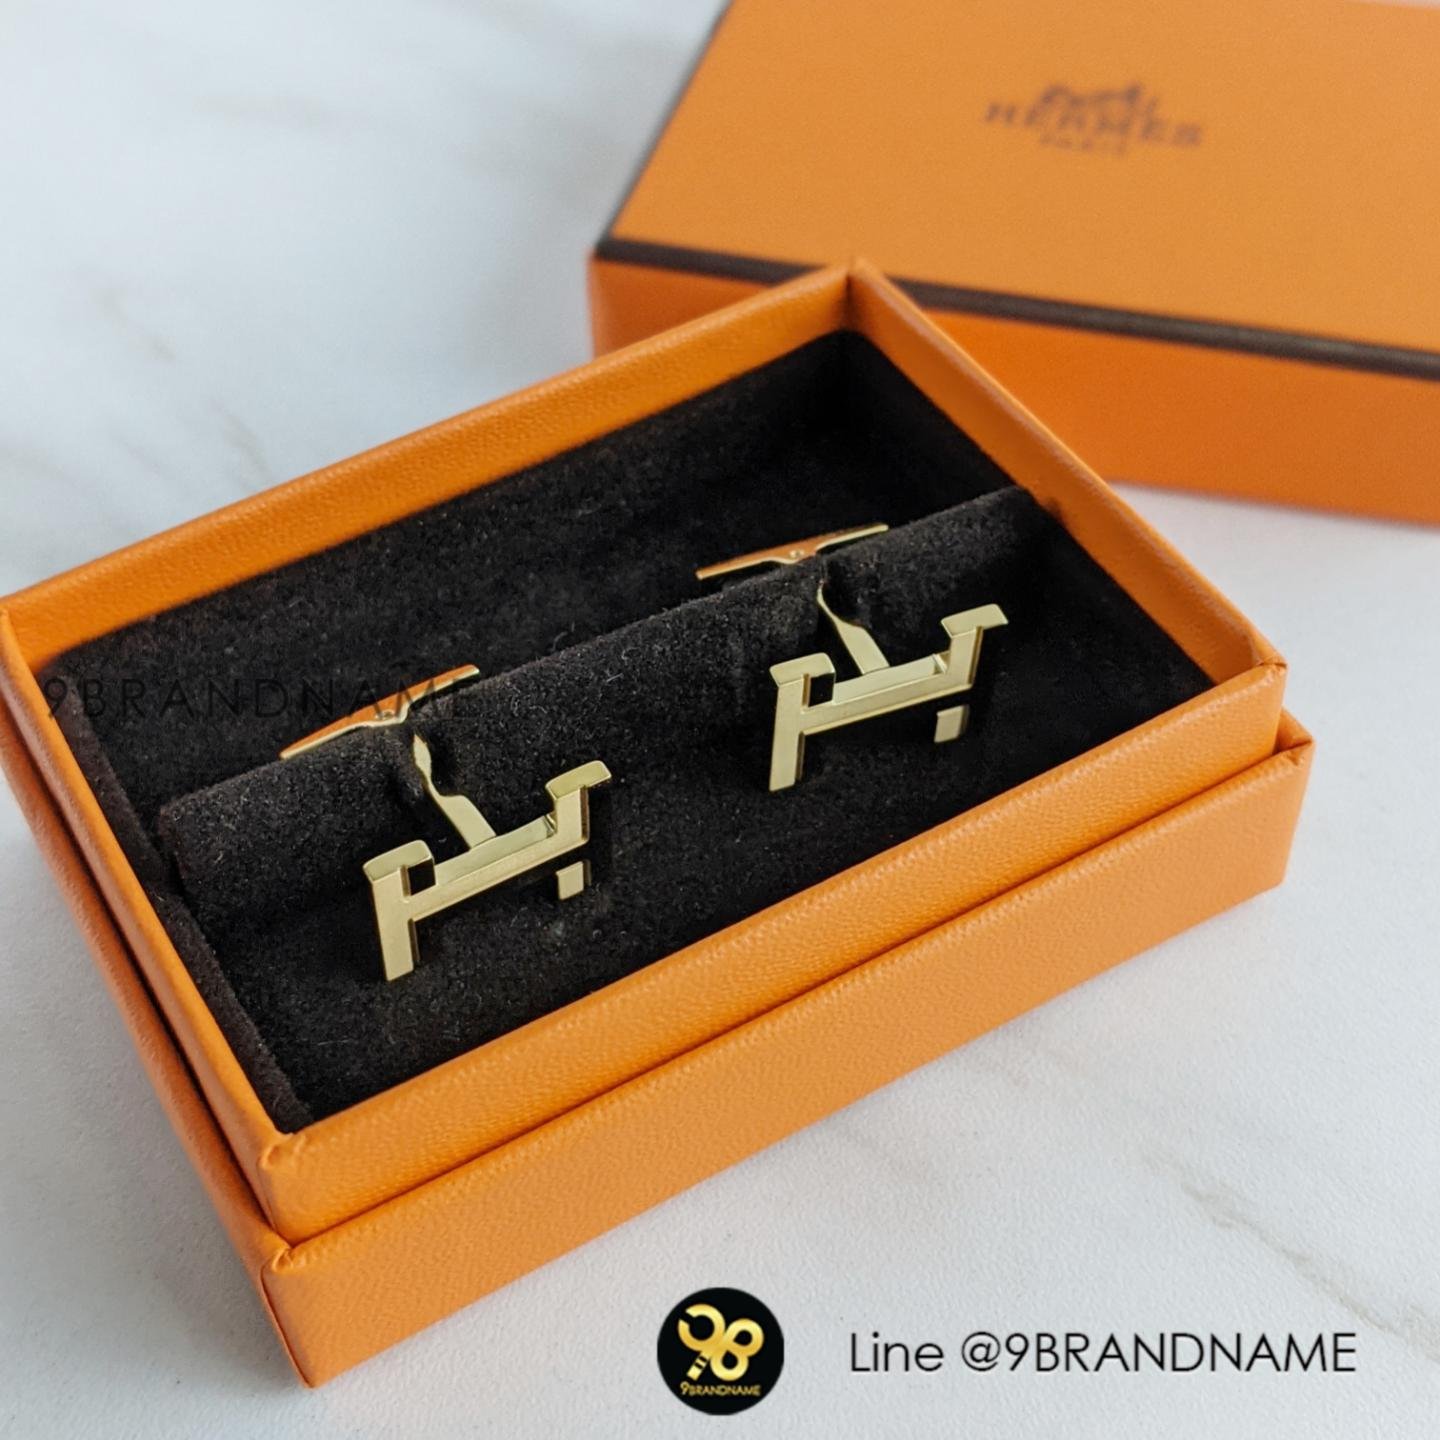 Hermes Boutons de manchette Cufflinks in metal with cold gold-plated hardware.